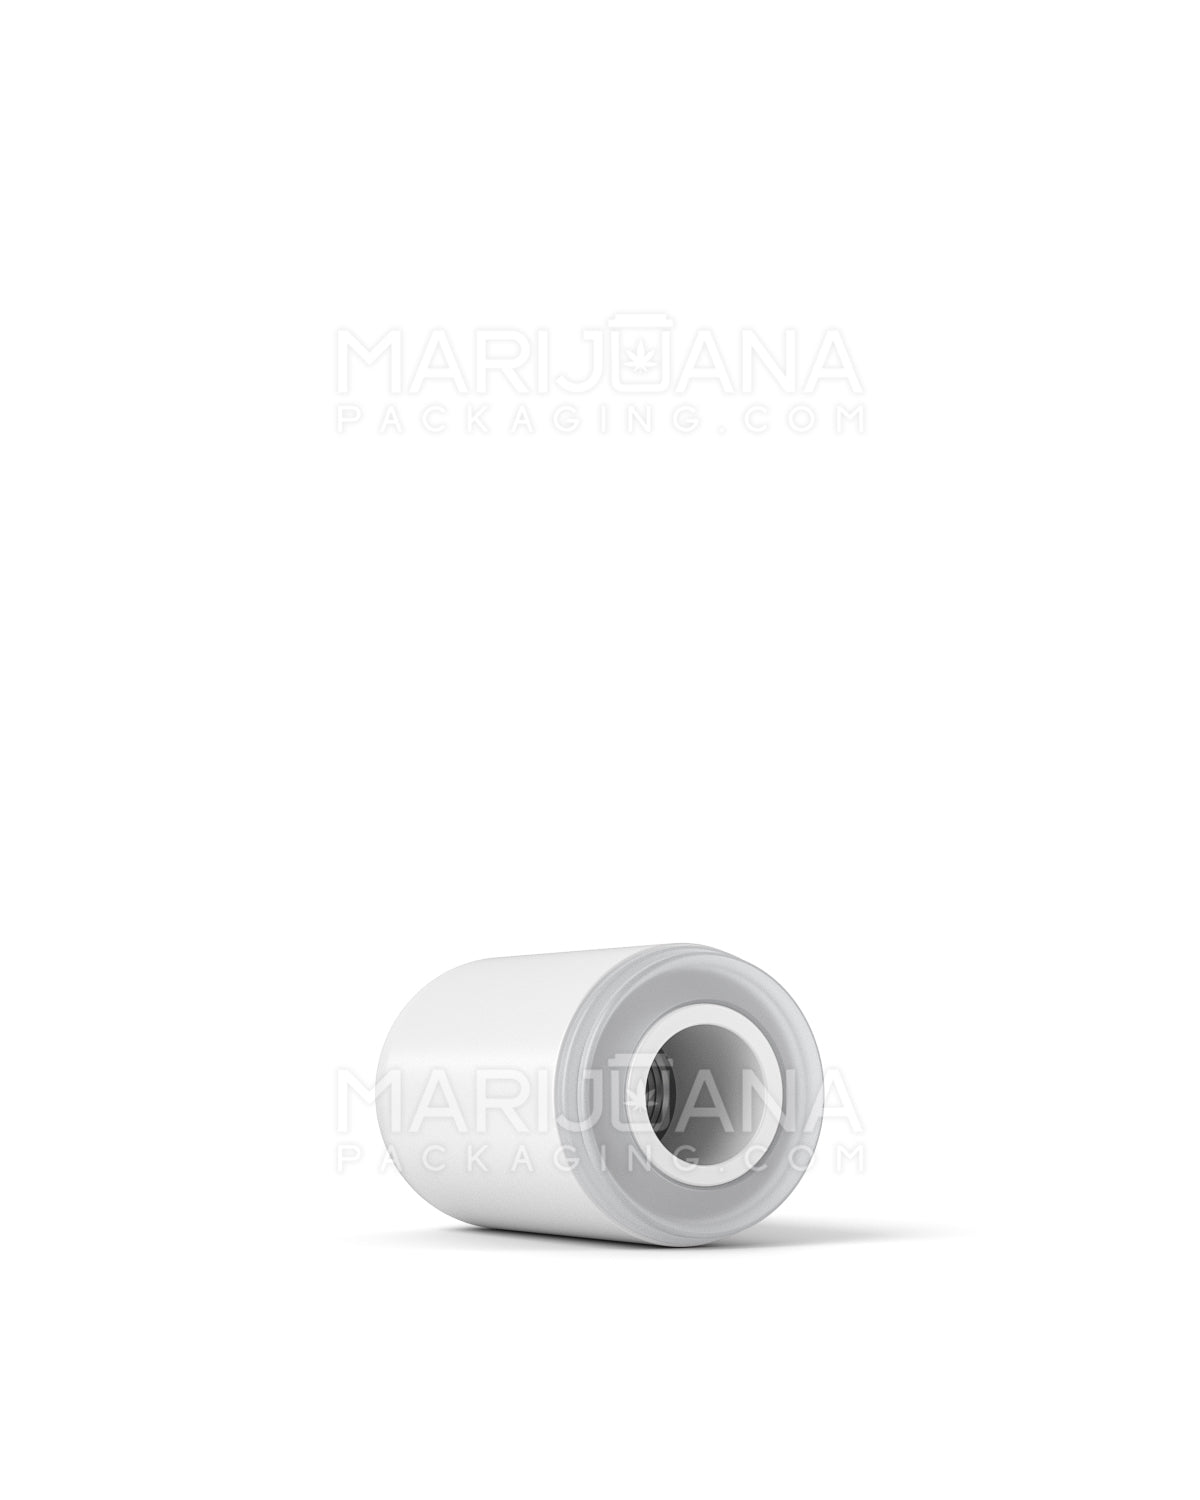 AVD | Round Vape Mouthpiece for Glass Cartridges | White Plastic - Screw On - 600 Count - 6